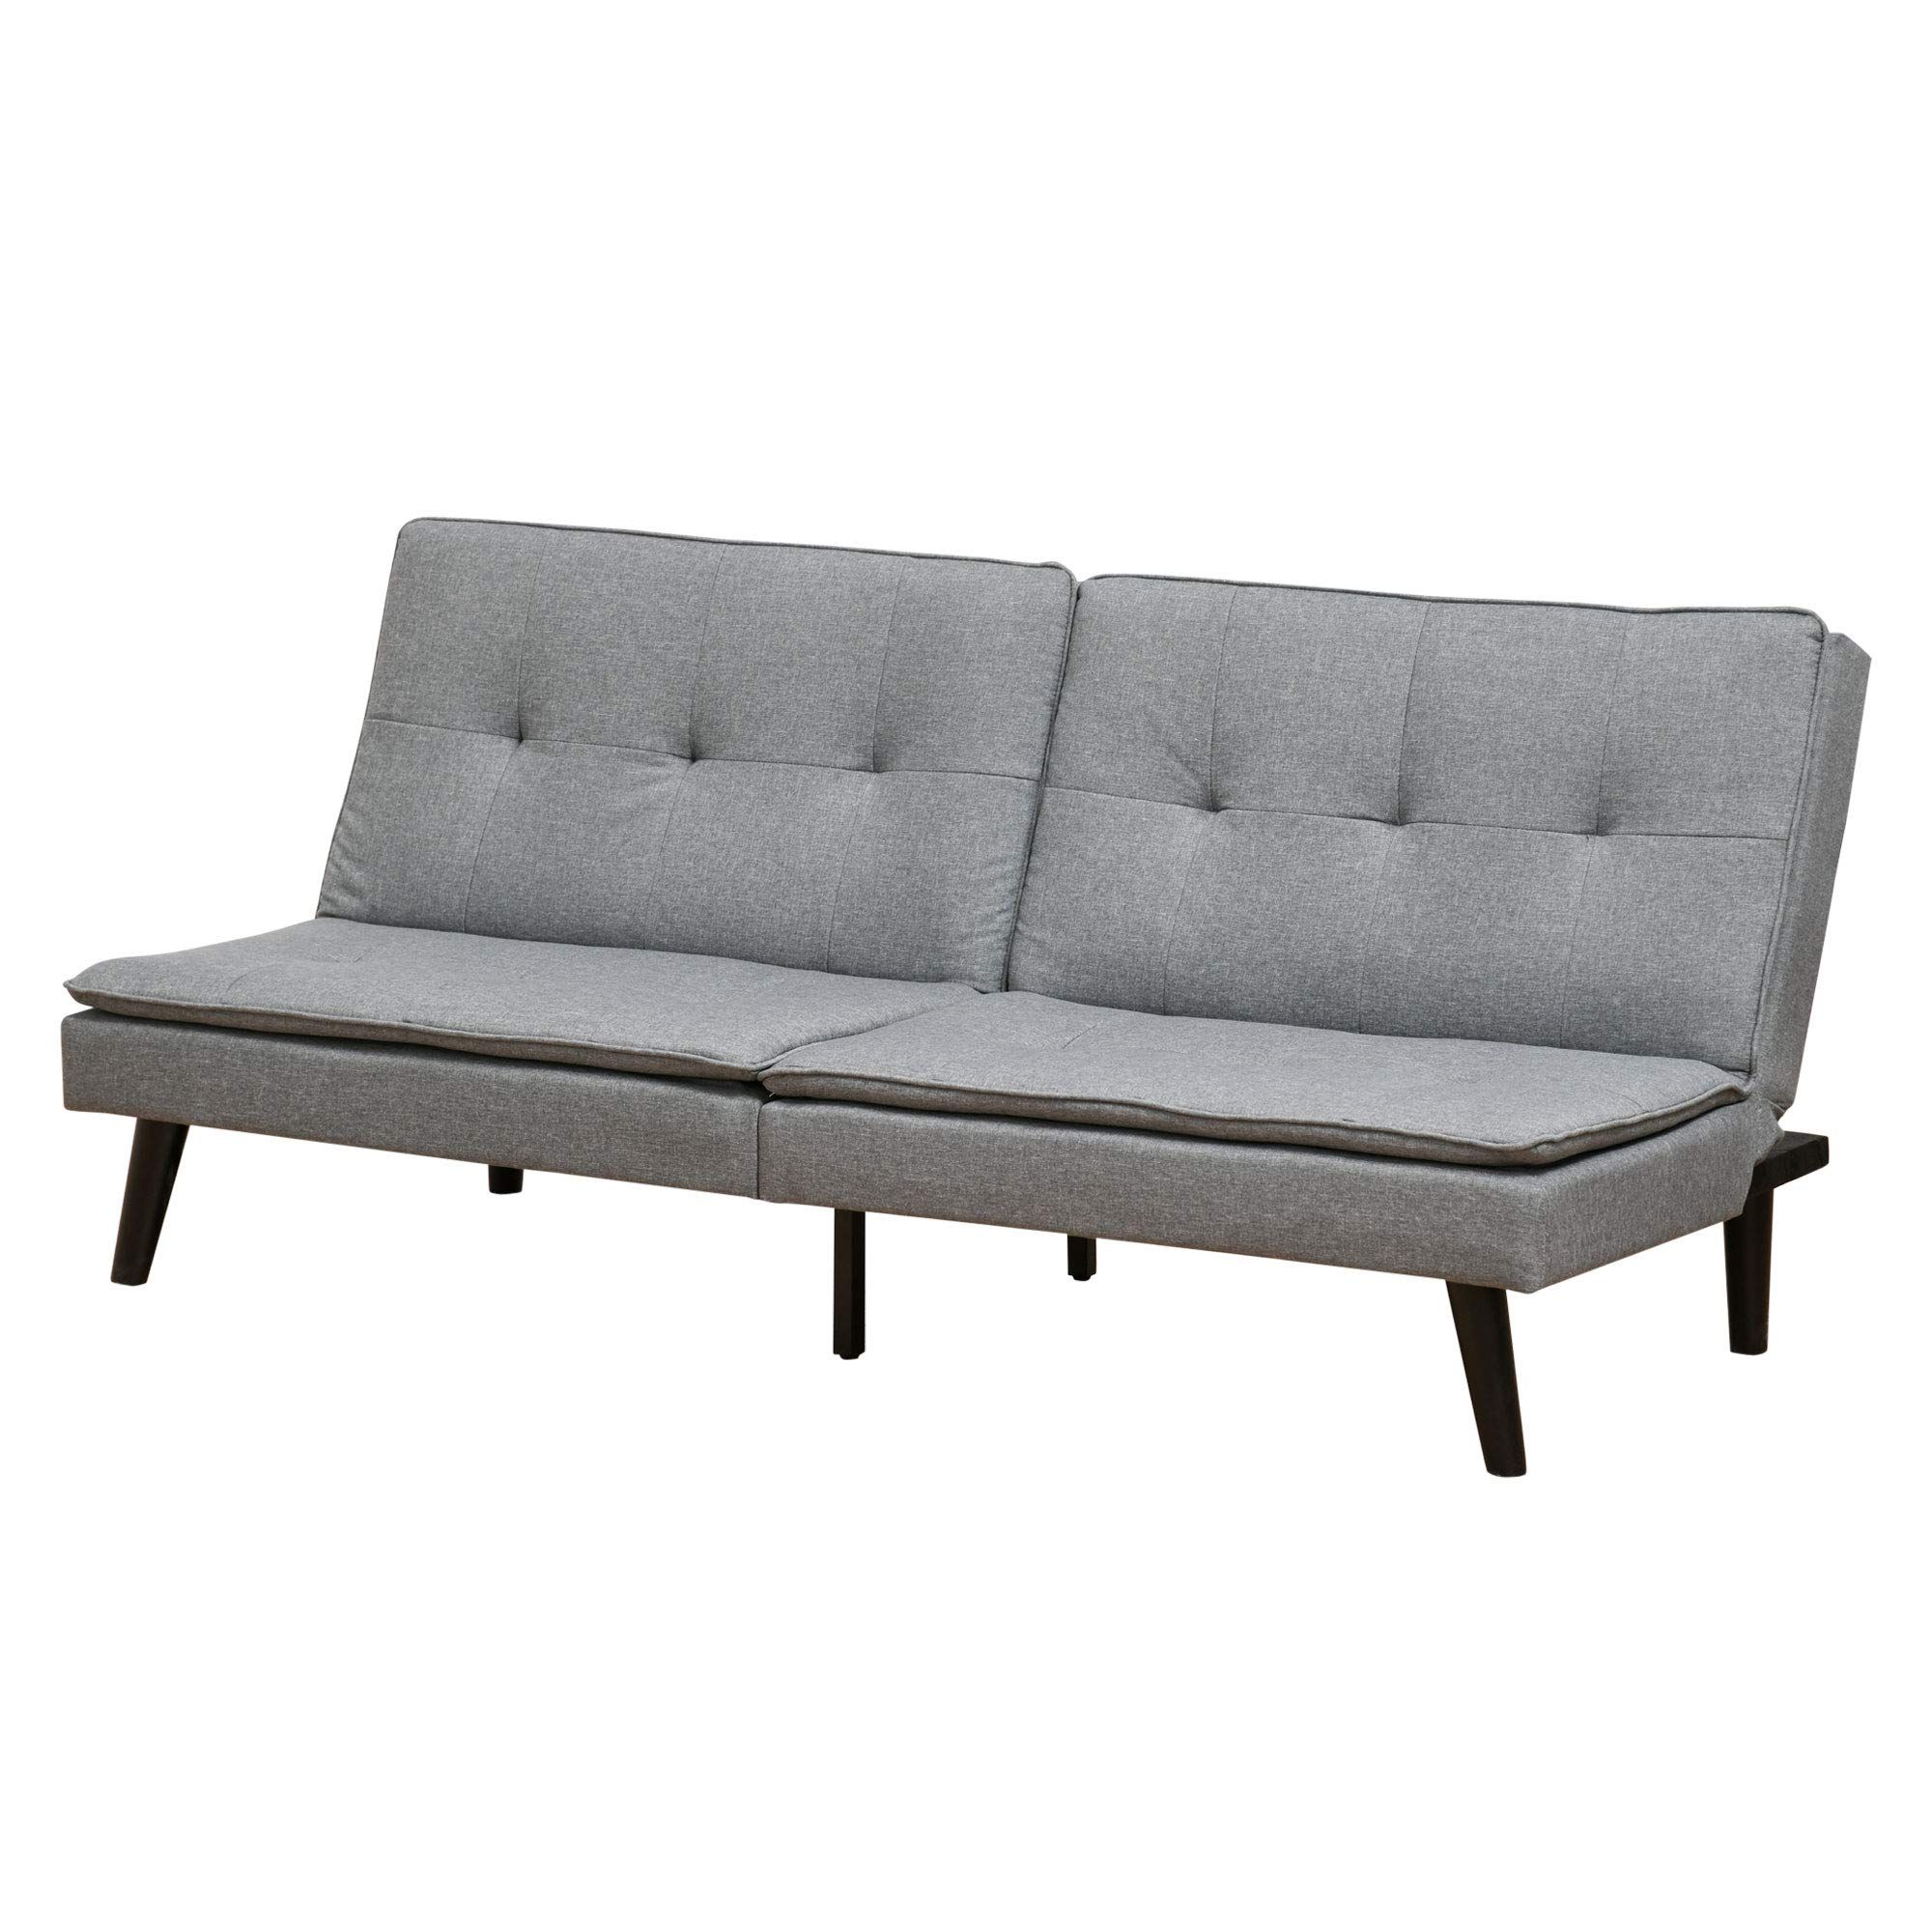 Most Recently Released Adjustable Backrest Futon Sofa Beds Intended For Buy Homcom Convertible Lounge Futon Sofa Bed Tufted Fabric Upholstered (View 11 of 15)